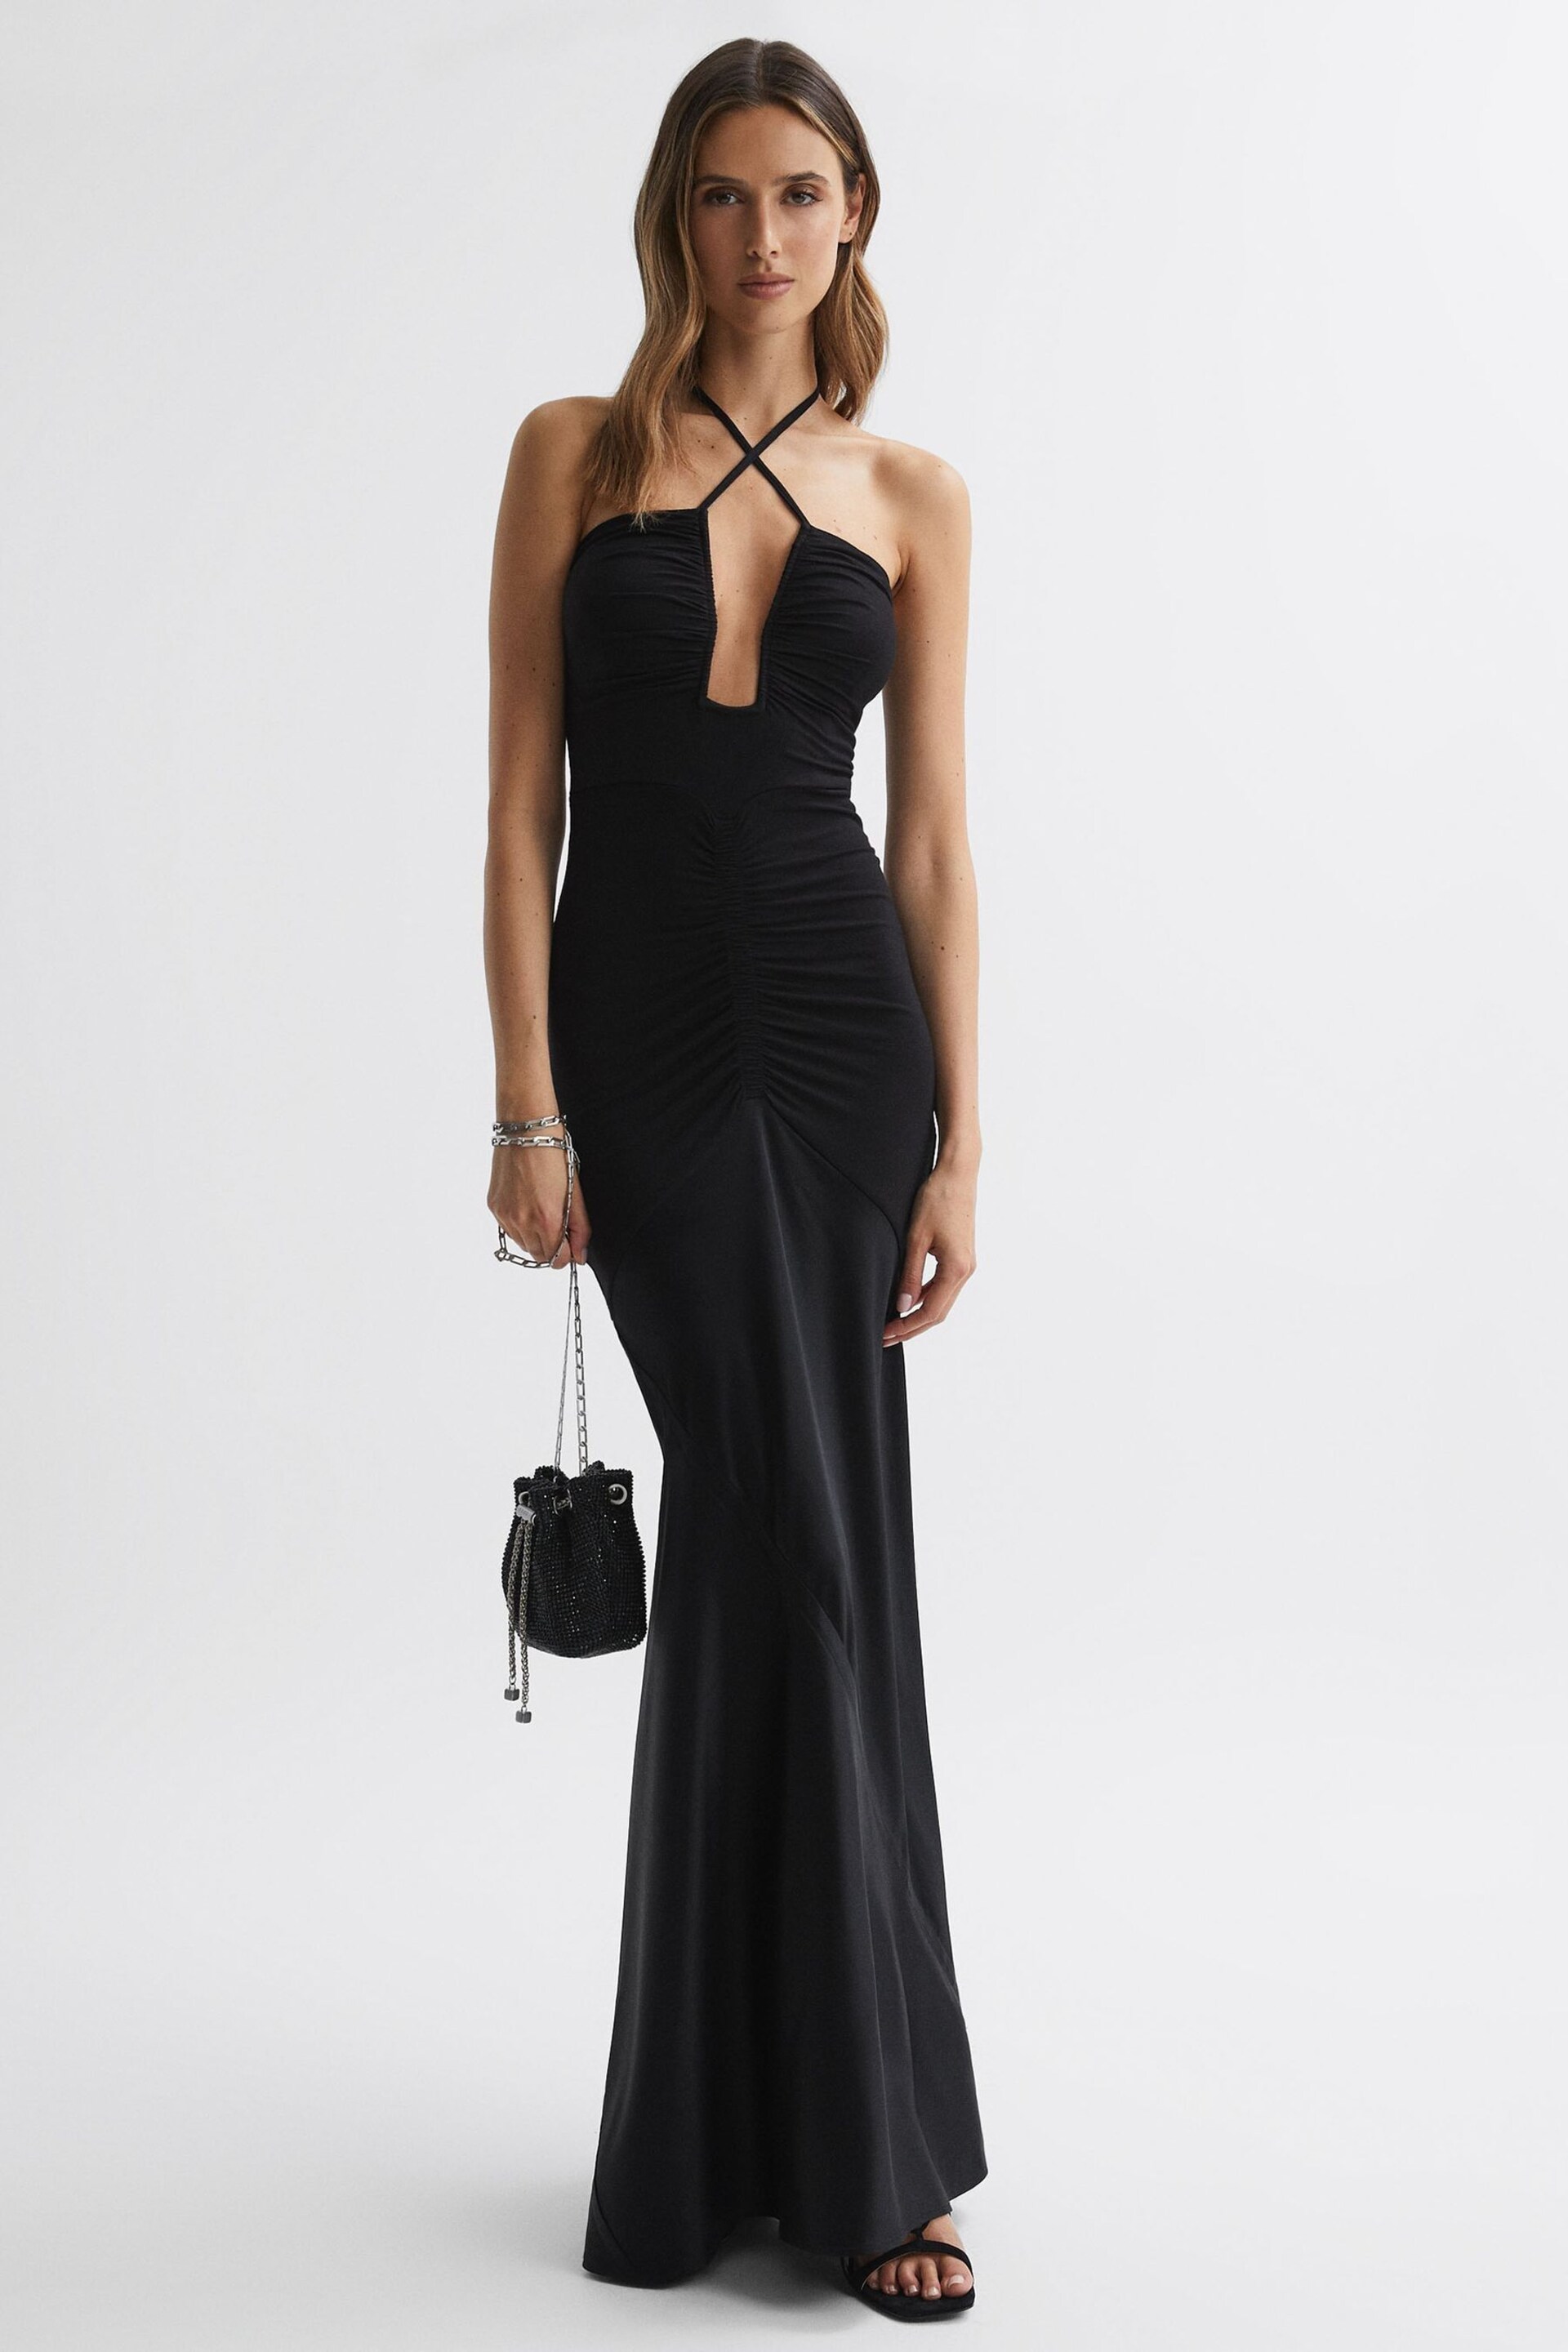 Reiss Black Thalia Fitted Plunge Neck Satin Maxi Dress - Image 1 of 4